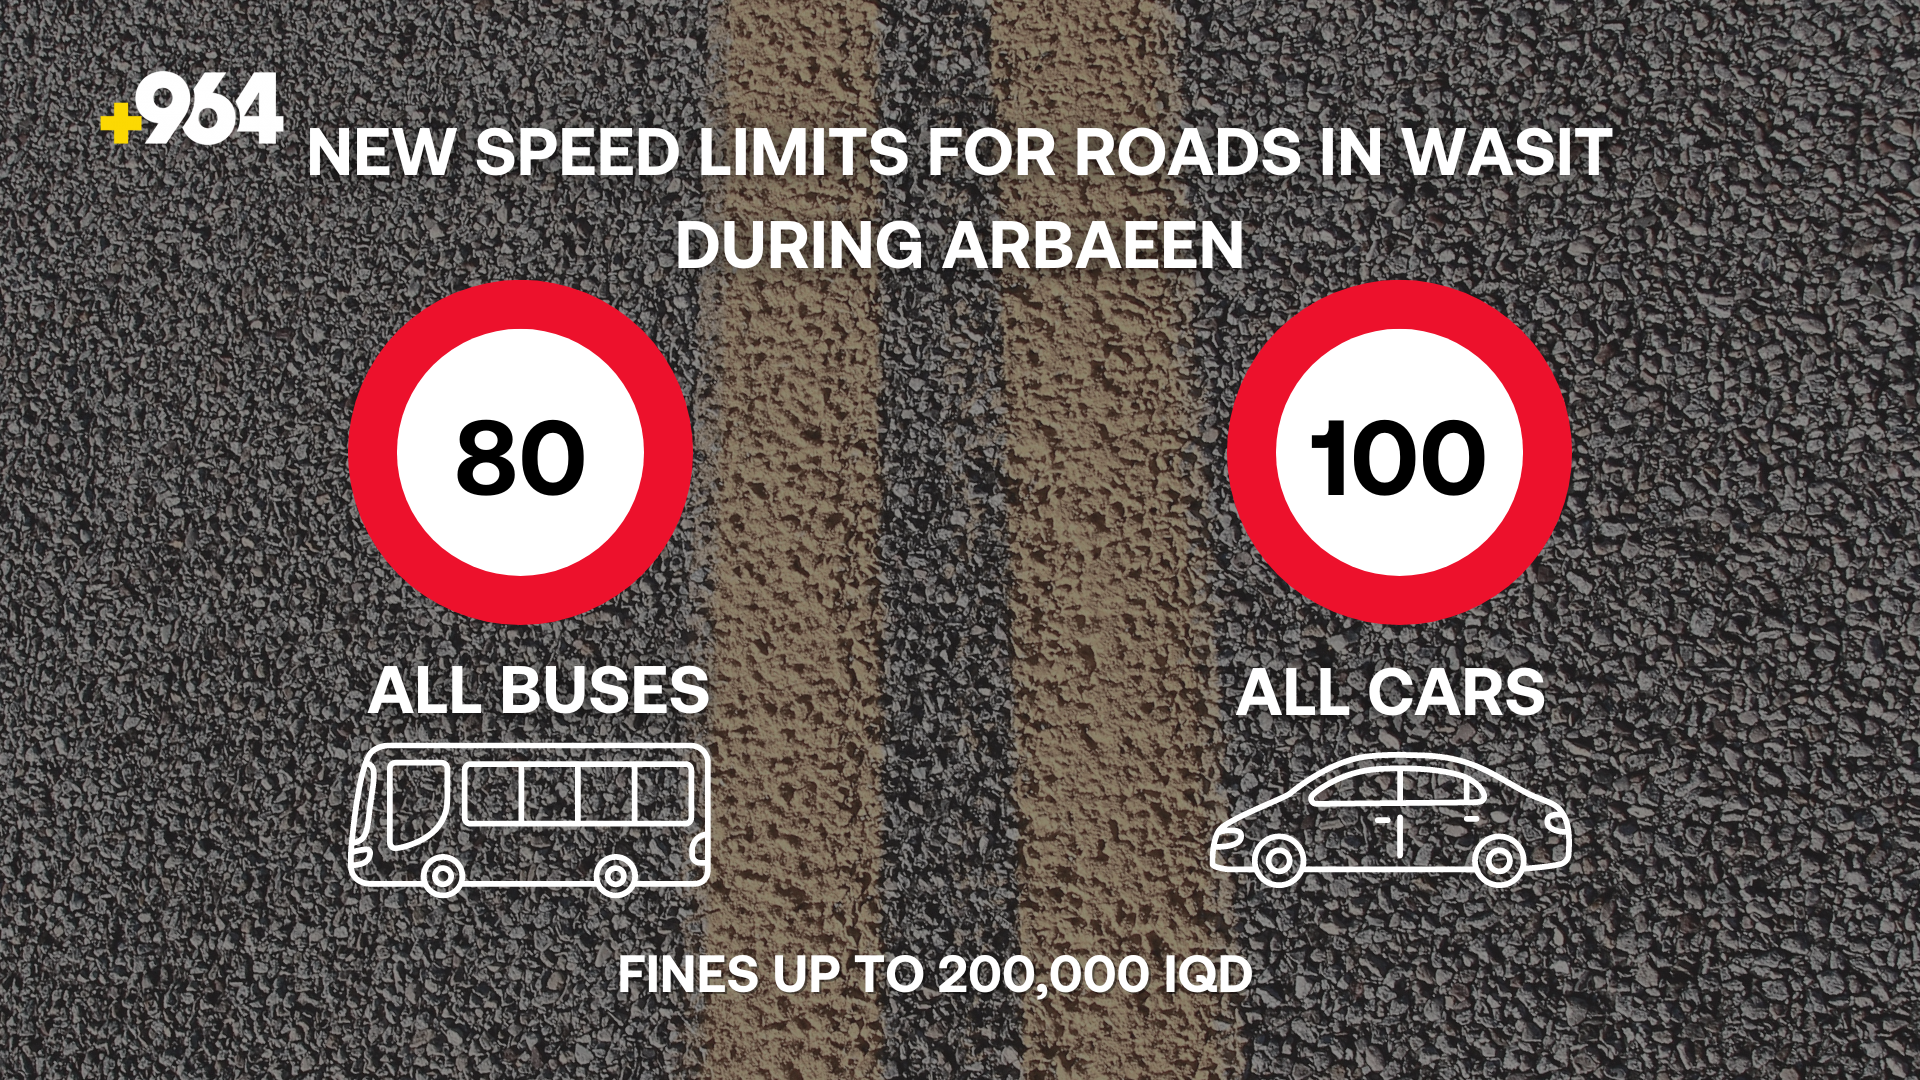 Wasit implements strict traffic rules for Arbaeen pilgrimage